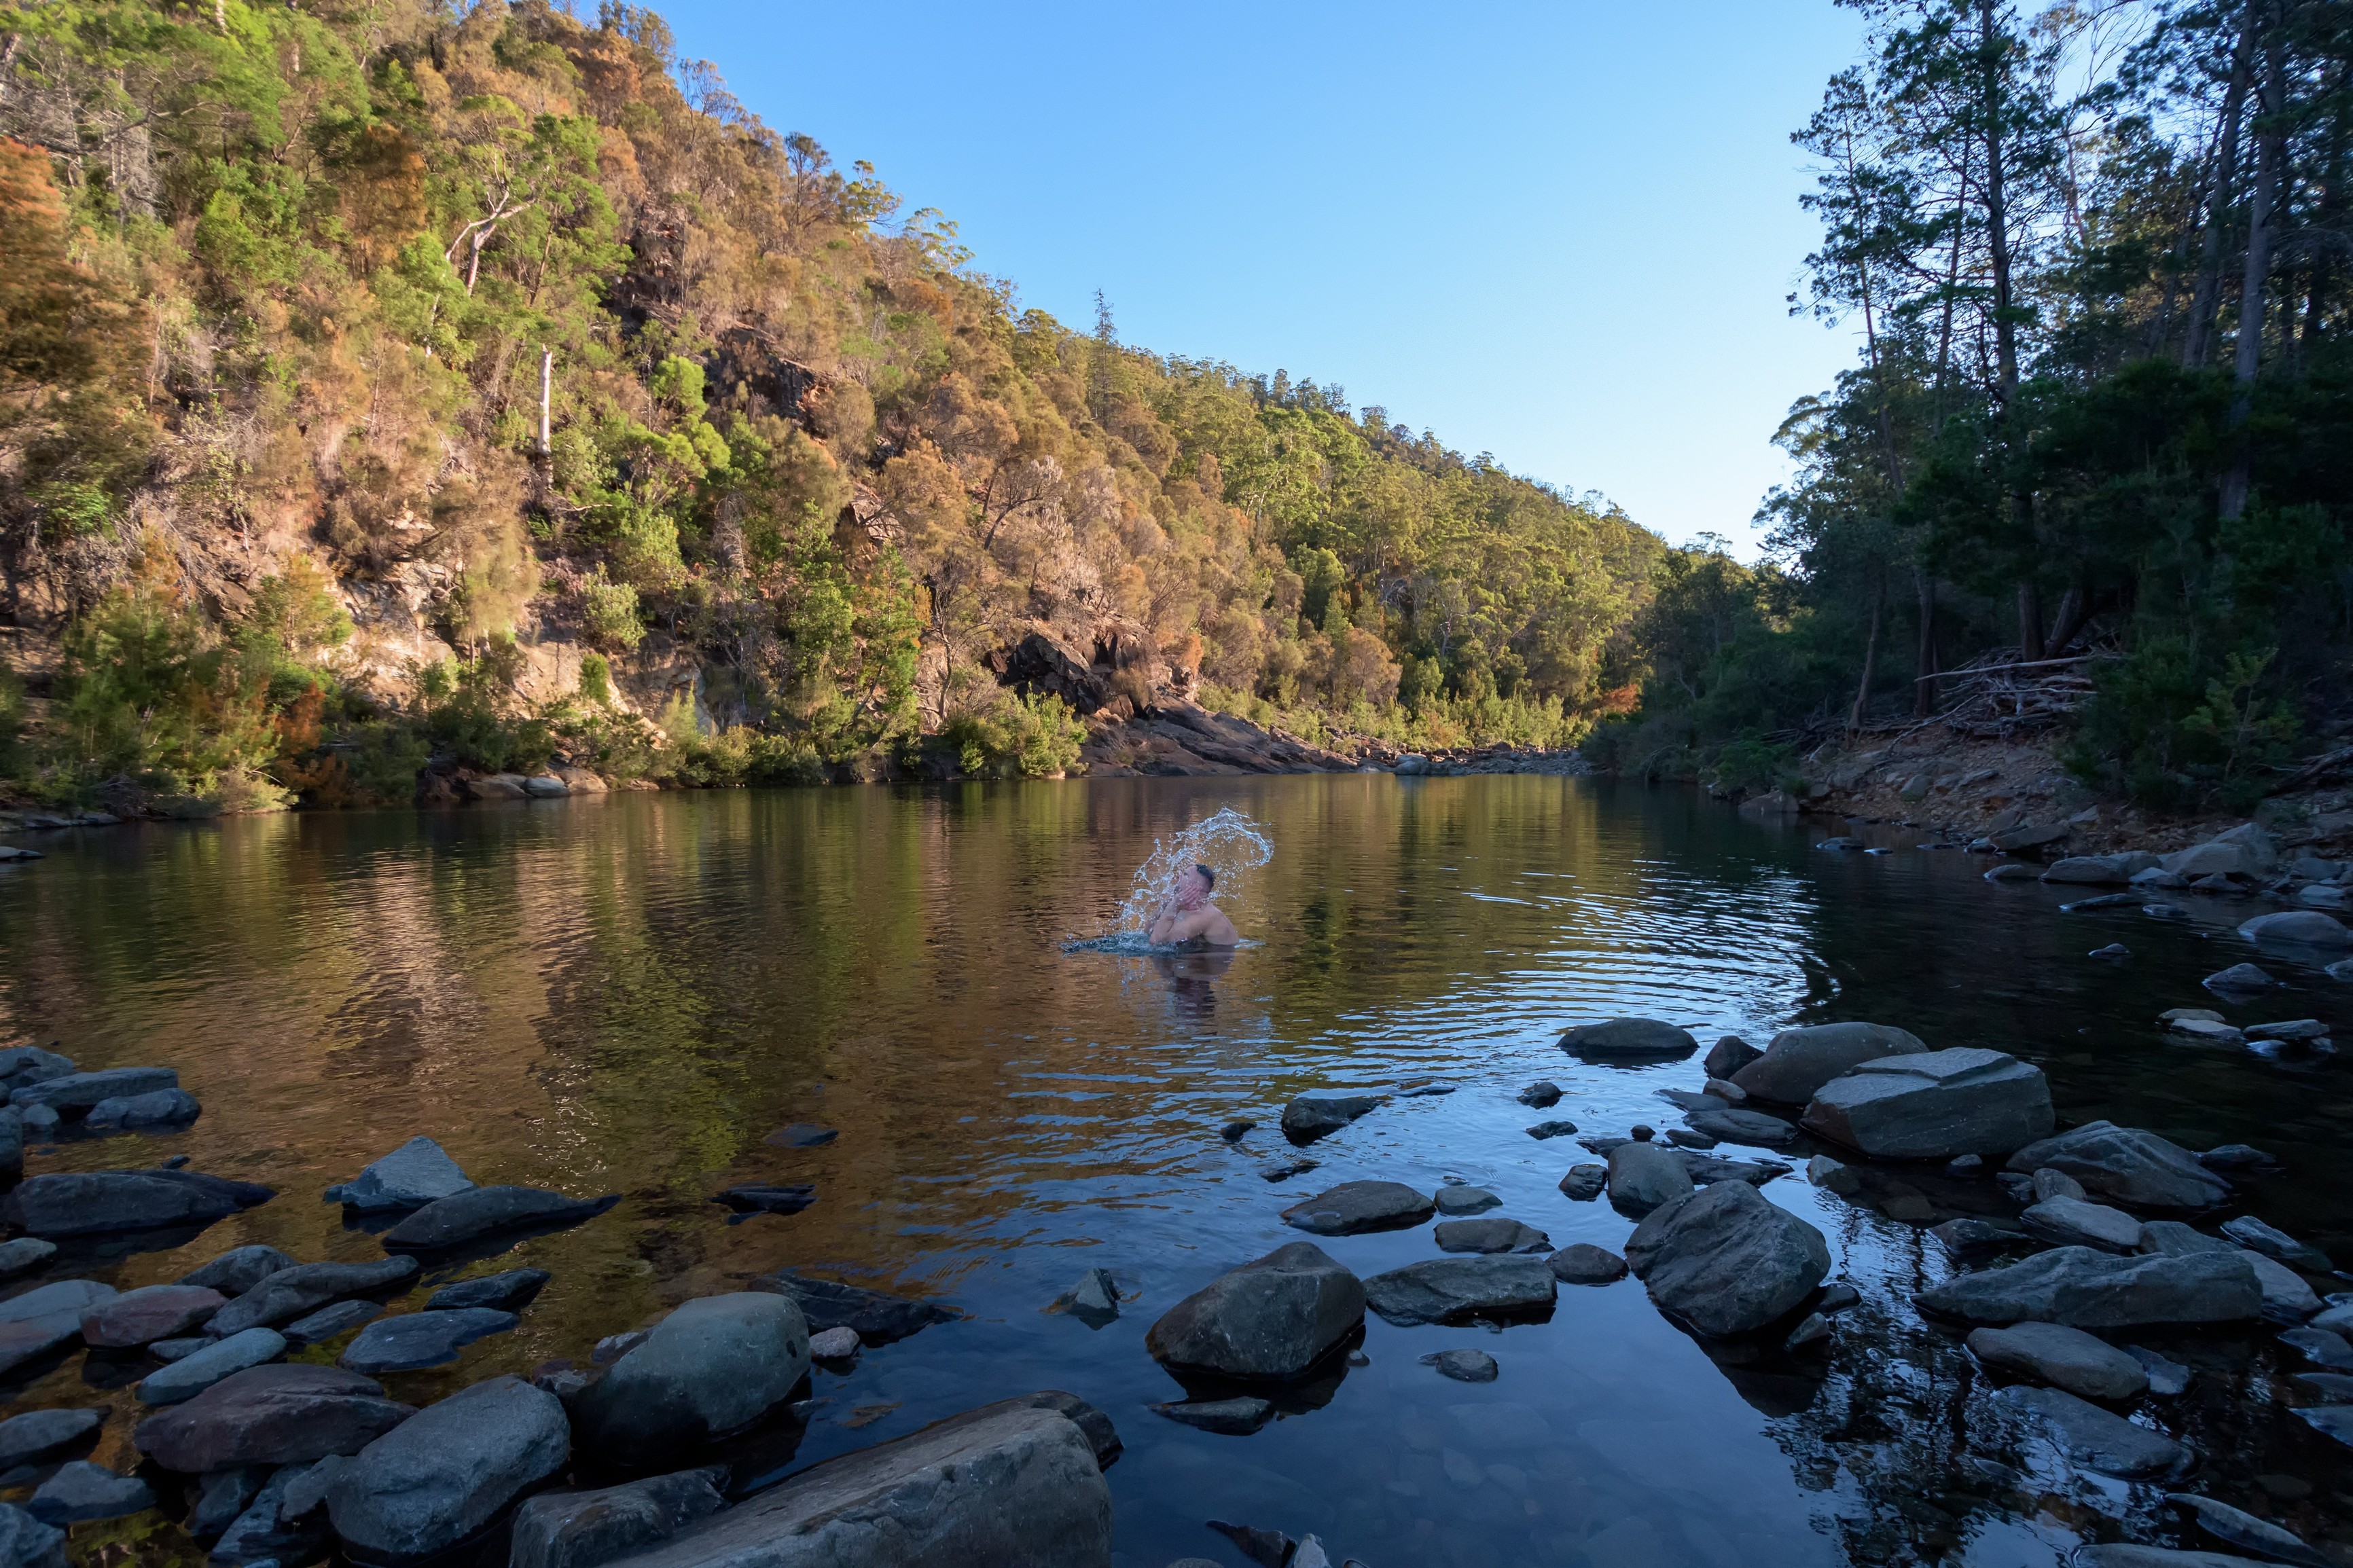 Person swimming at Apsley Gorge, surrounded by rugged rocks and forest.